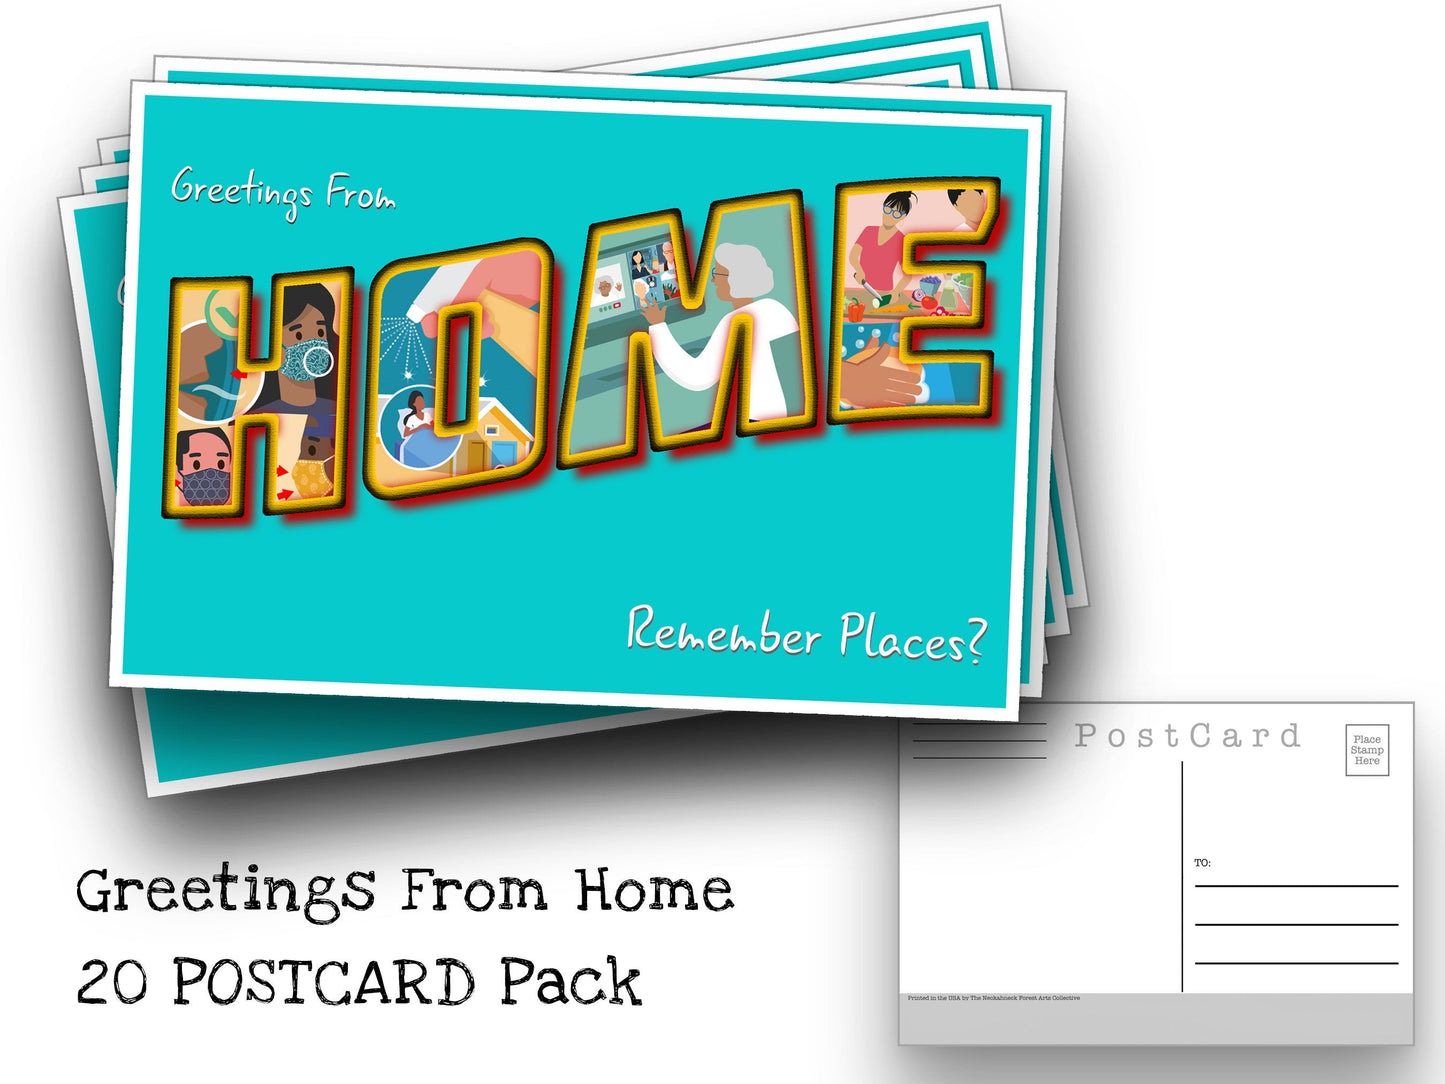 Greetings From Home Postcard Pack- Set of 20 Identical Corona Virus Postcards - Created from the CDC's Covid-19 posters